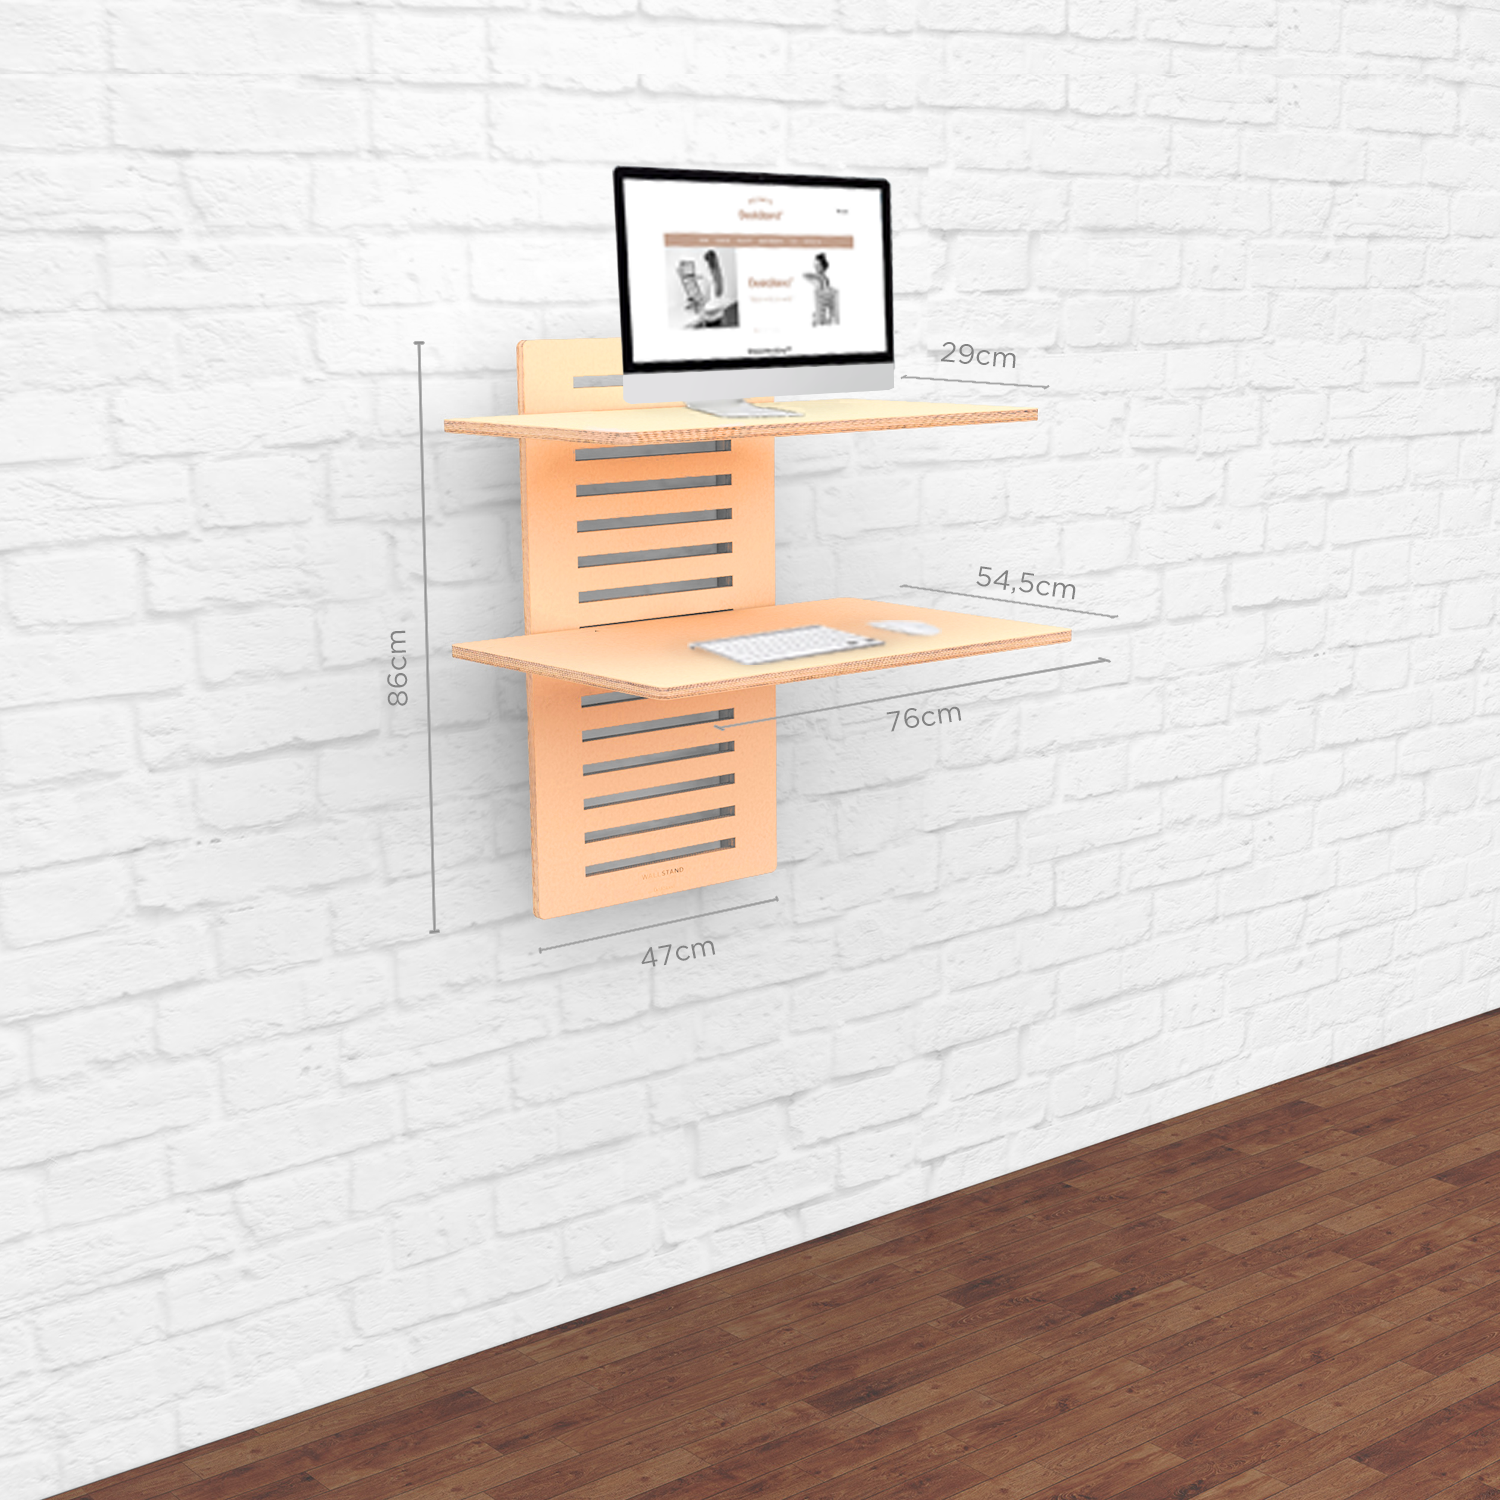 WallStand - Adjustable Wall-mounted Standing Desk - home • office • health